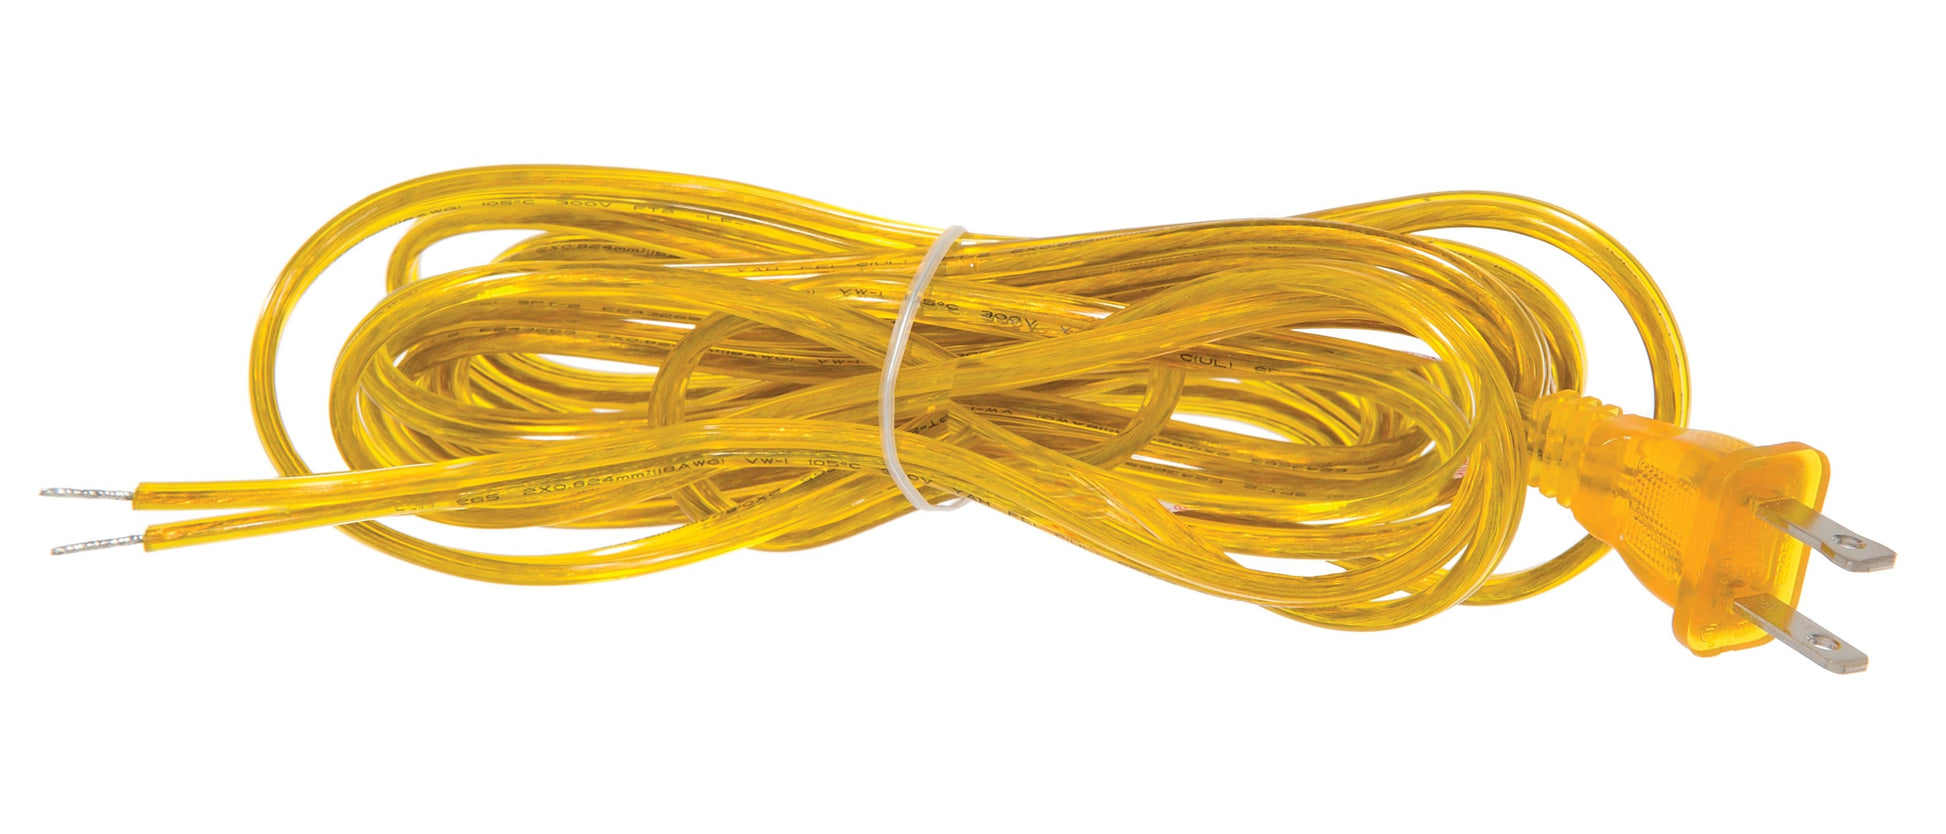 12 Ft. Clear Gold 18/2 SPT-2 Plastic Covered Lamp Cord Set, Tinned